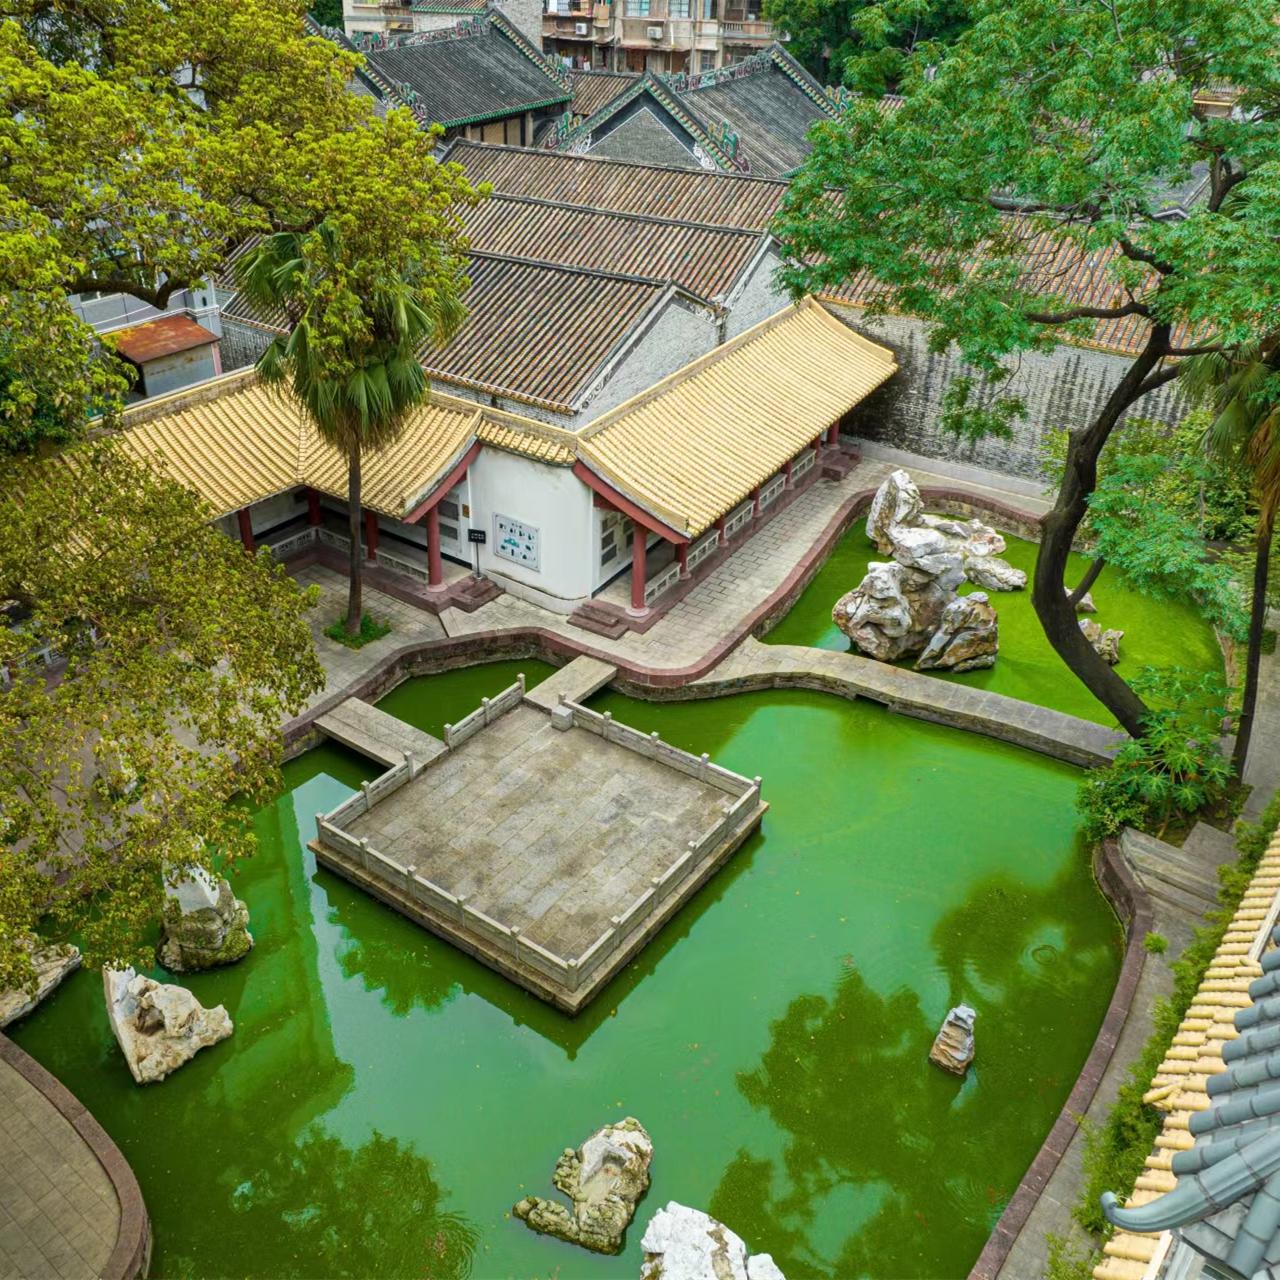 Guangzhou unveils first batch of historical gardens and parks